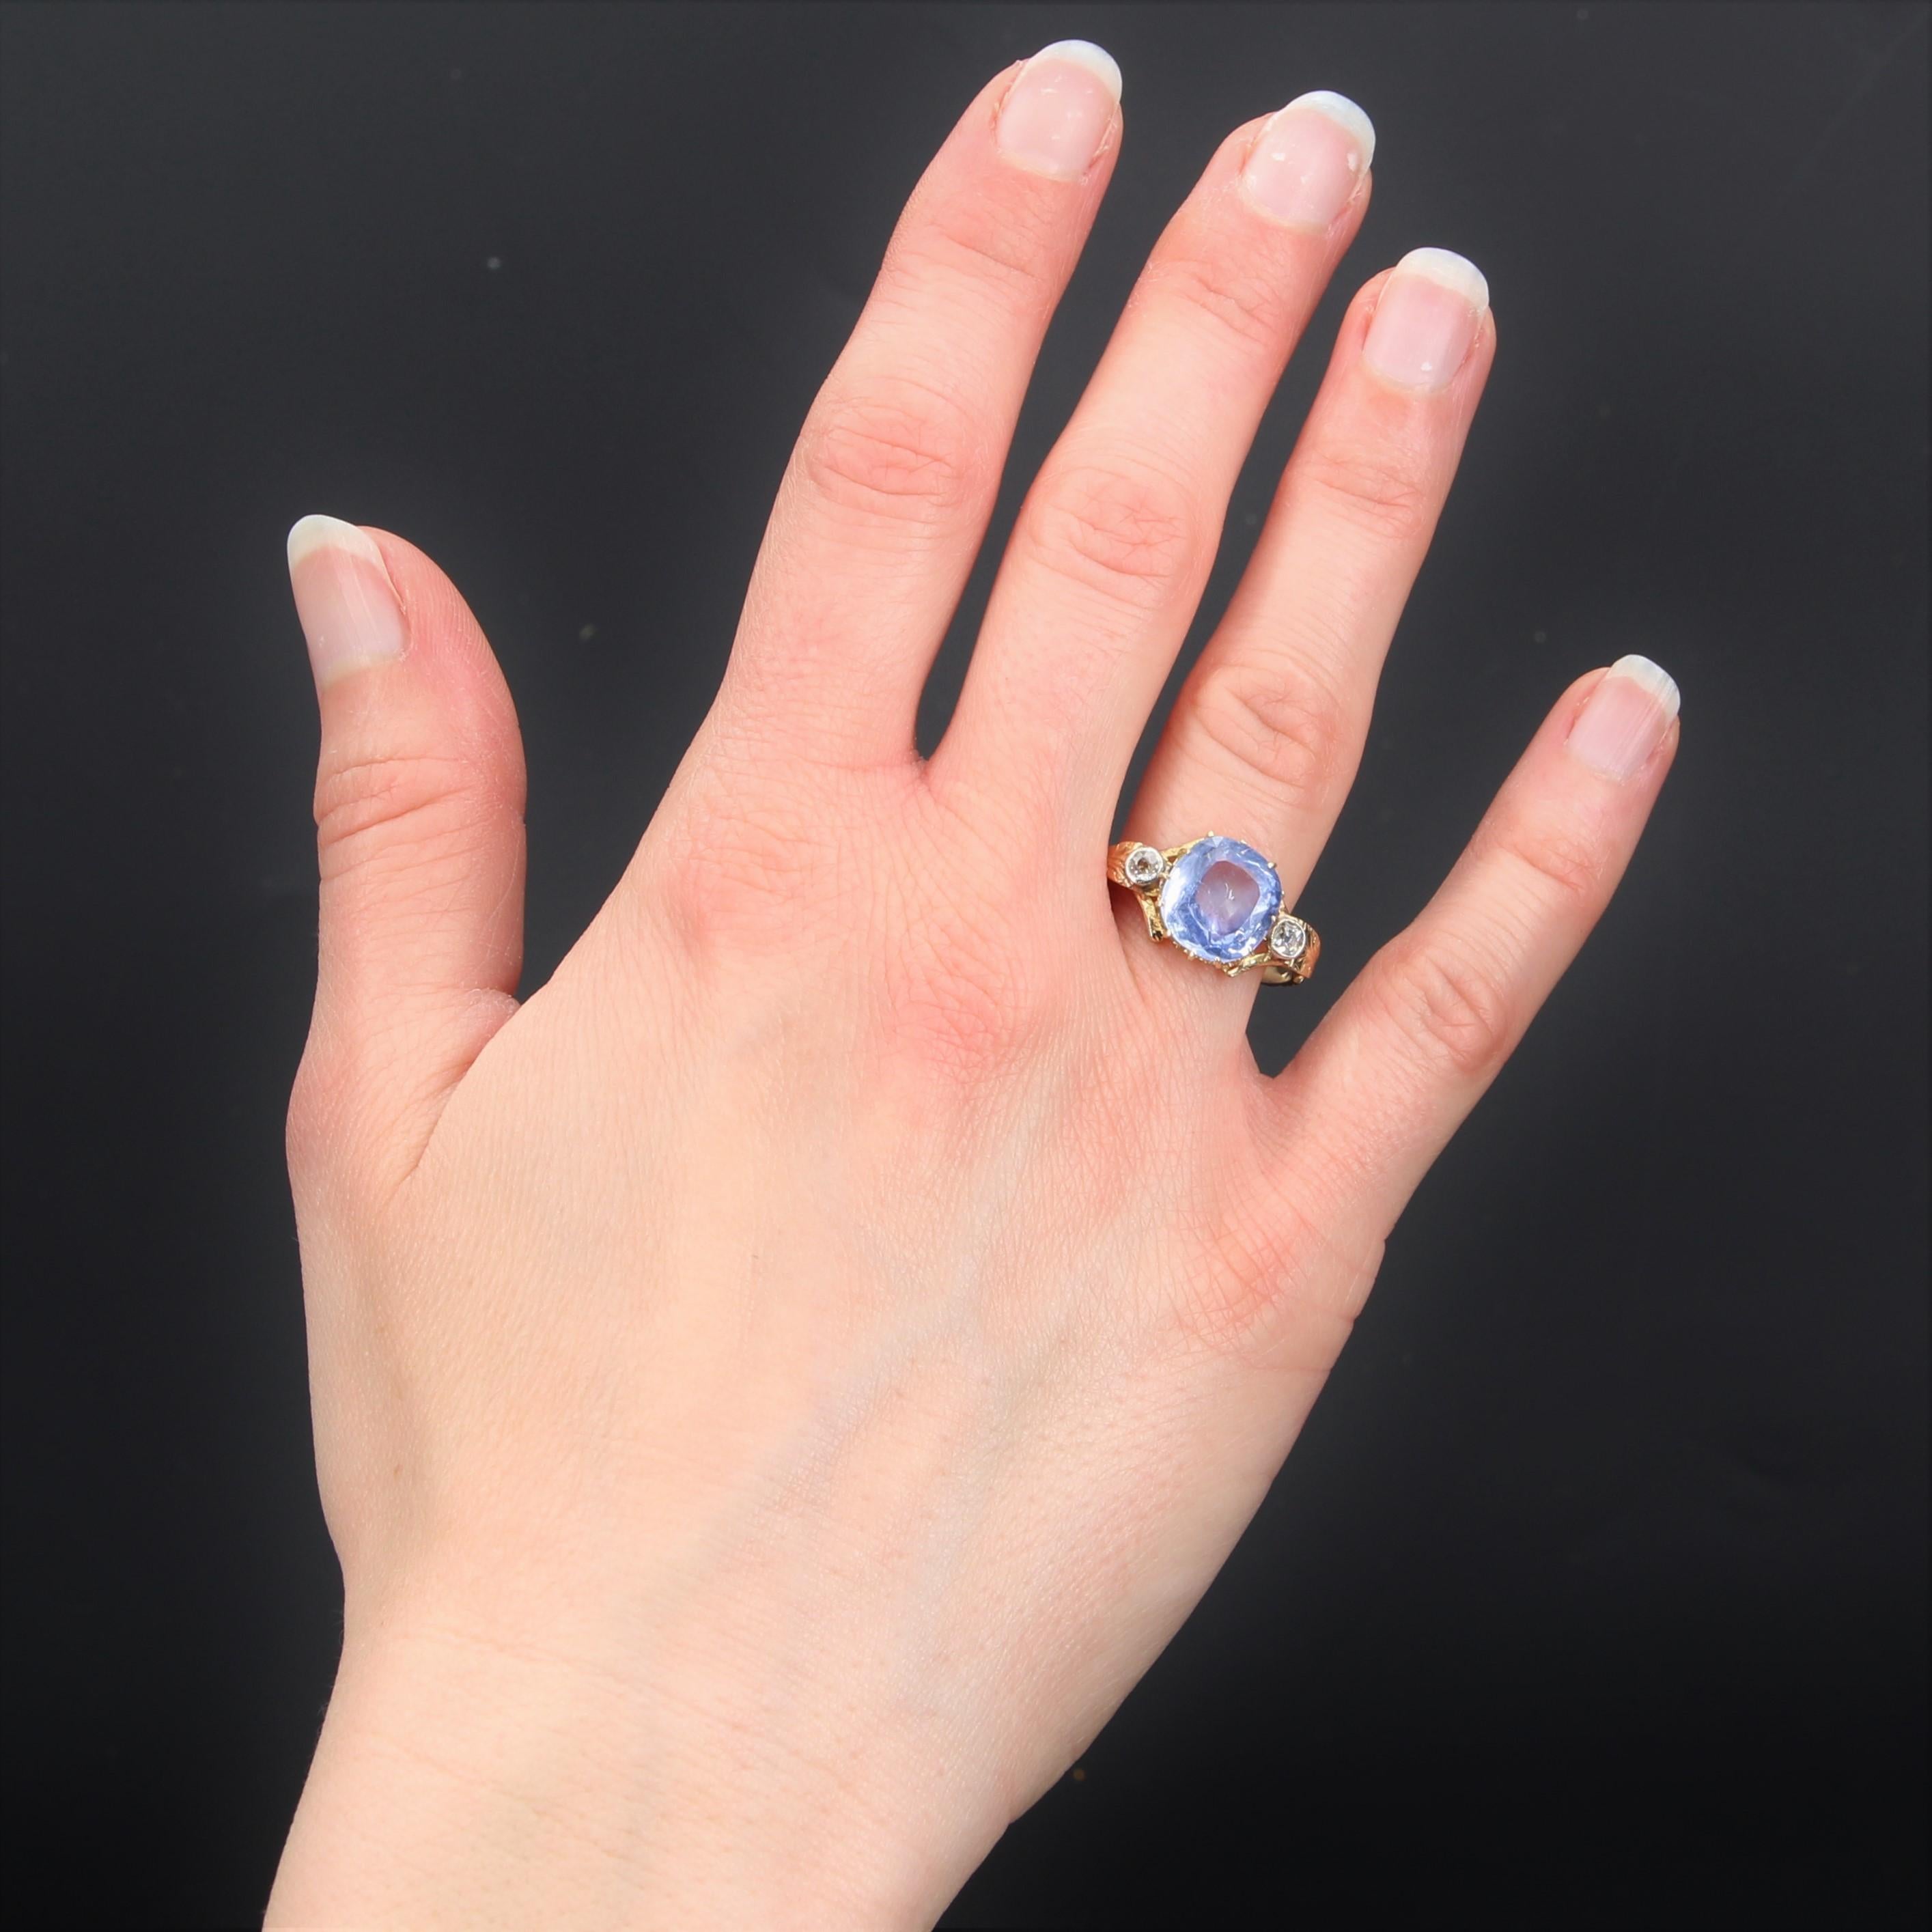 Ring in 18 karat yellow gold.
Superb antique ring set with claws on its top of a cushion- cut blue sapphire, shouldered by two antique brilliant- cut diamonds which are supported by two chiseled gold leaves. The rest of the ring is worked with